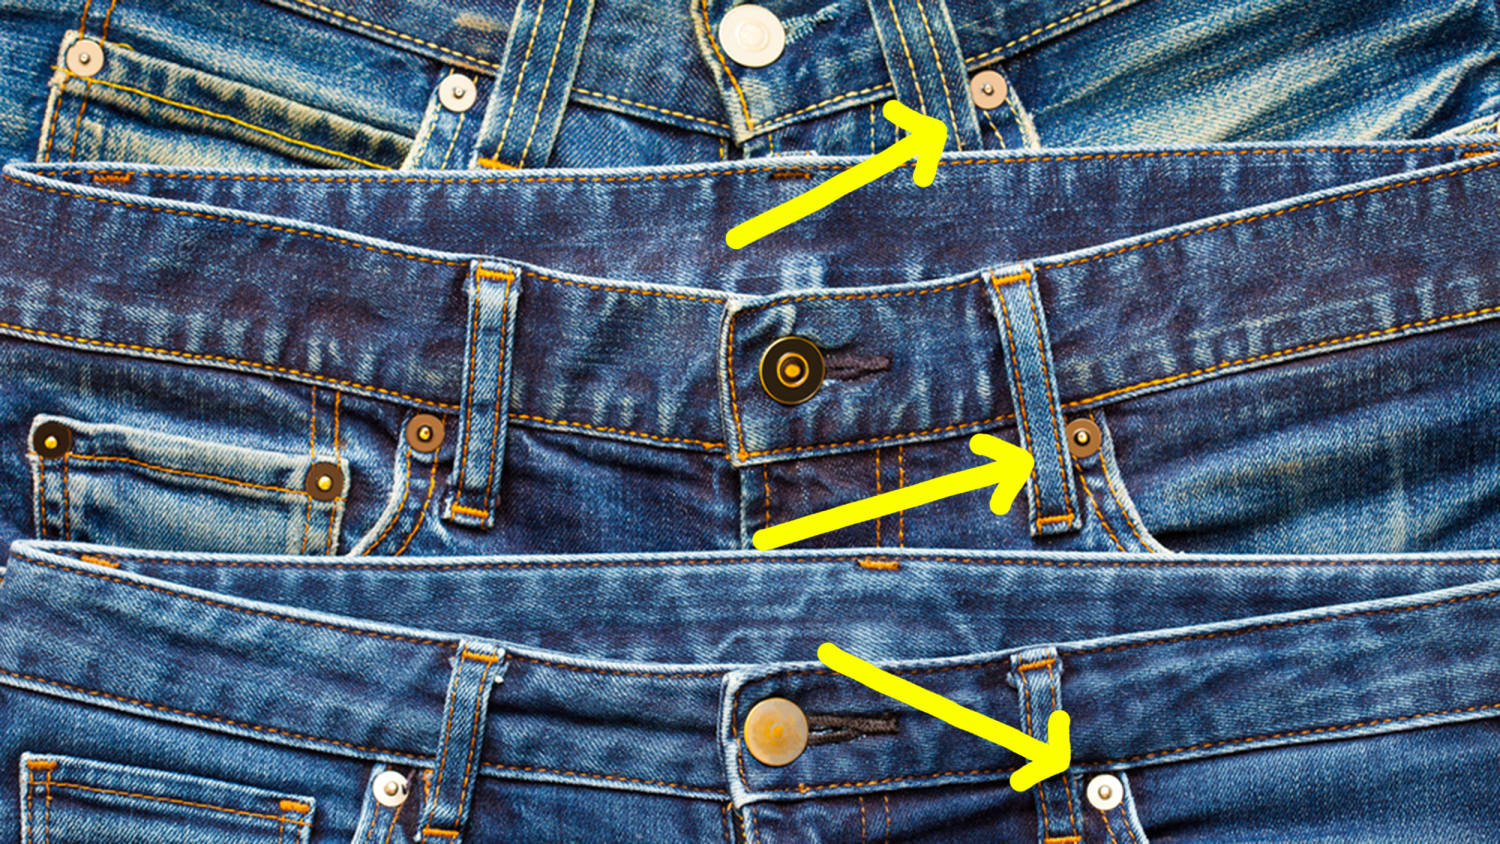 Jean rivets: What are little studs actually for?